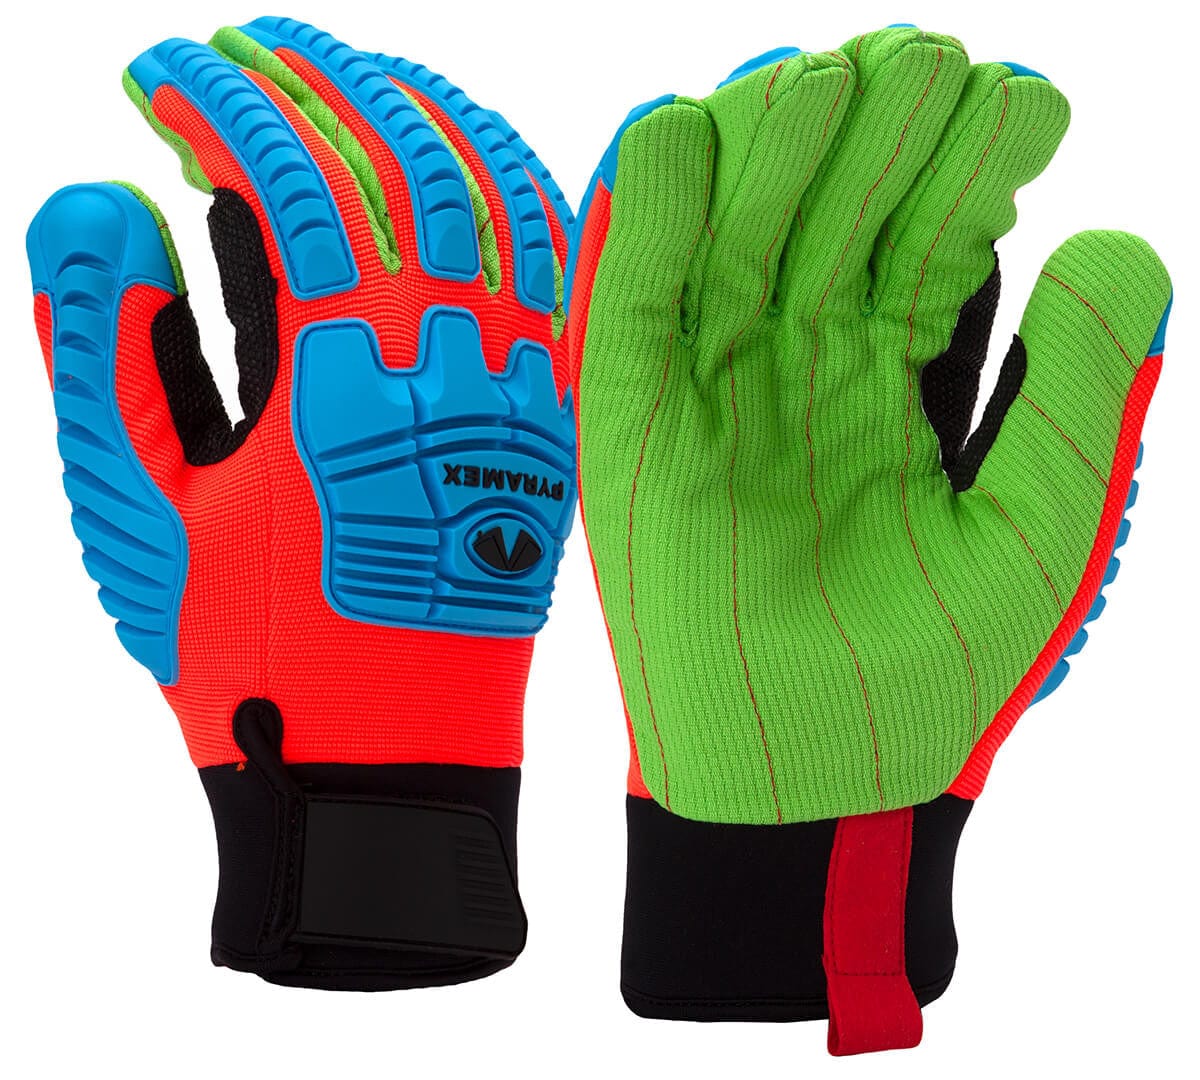 Pyramex GL804C Winter Water-Resistant Cut-Resistant Gloves